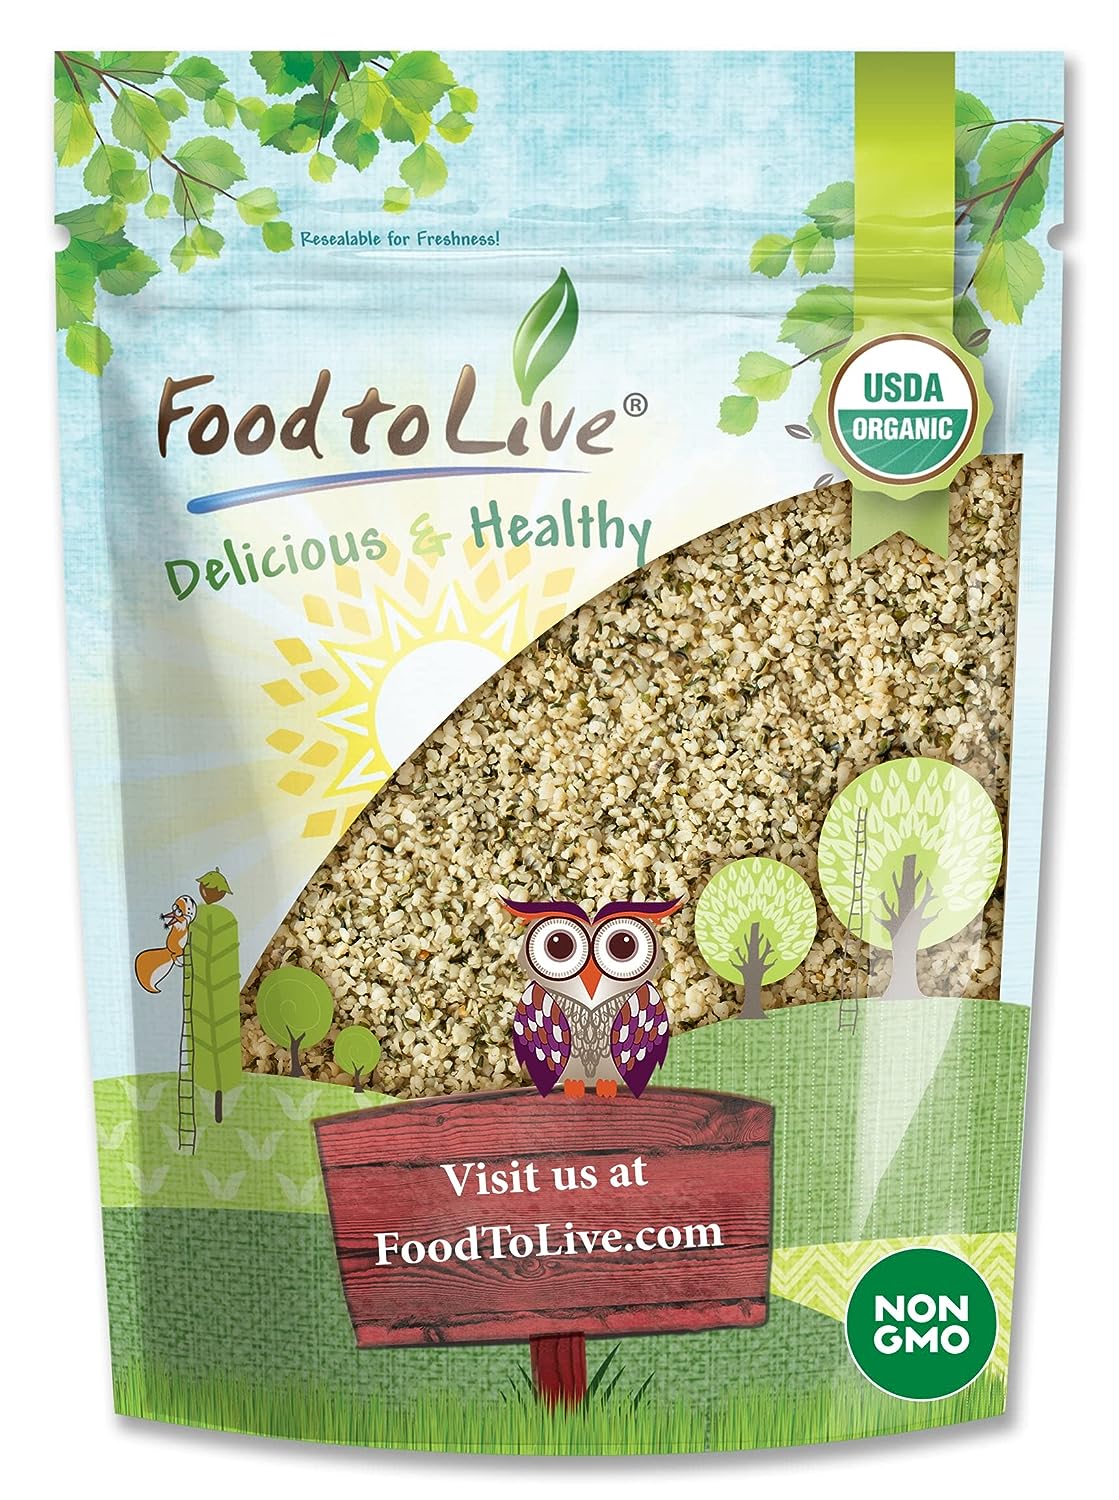 Organic Hemp Seeds - Non-GMO Raw Hearts, Hulled, Shelled, Kosher, Vegan, Bulk, Low Carb, Low Sodium, Good Source of Protein & Iron, Great for Oatmeal, Product of China